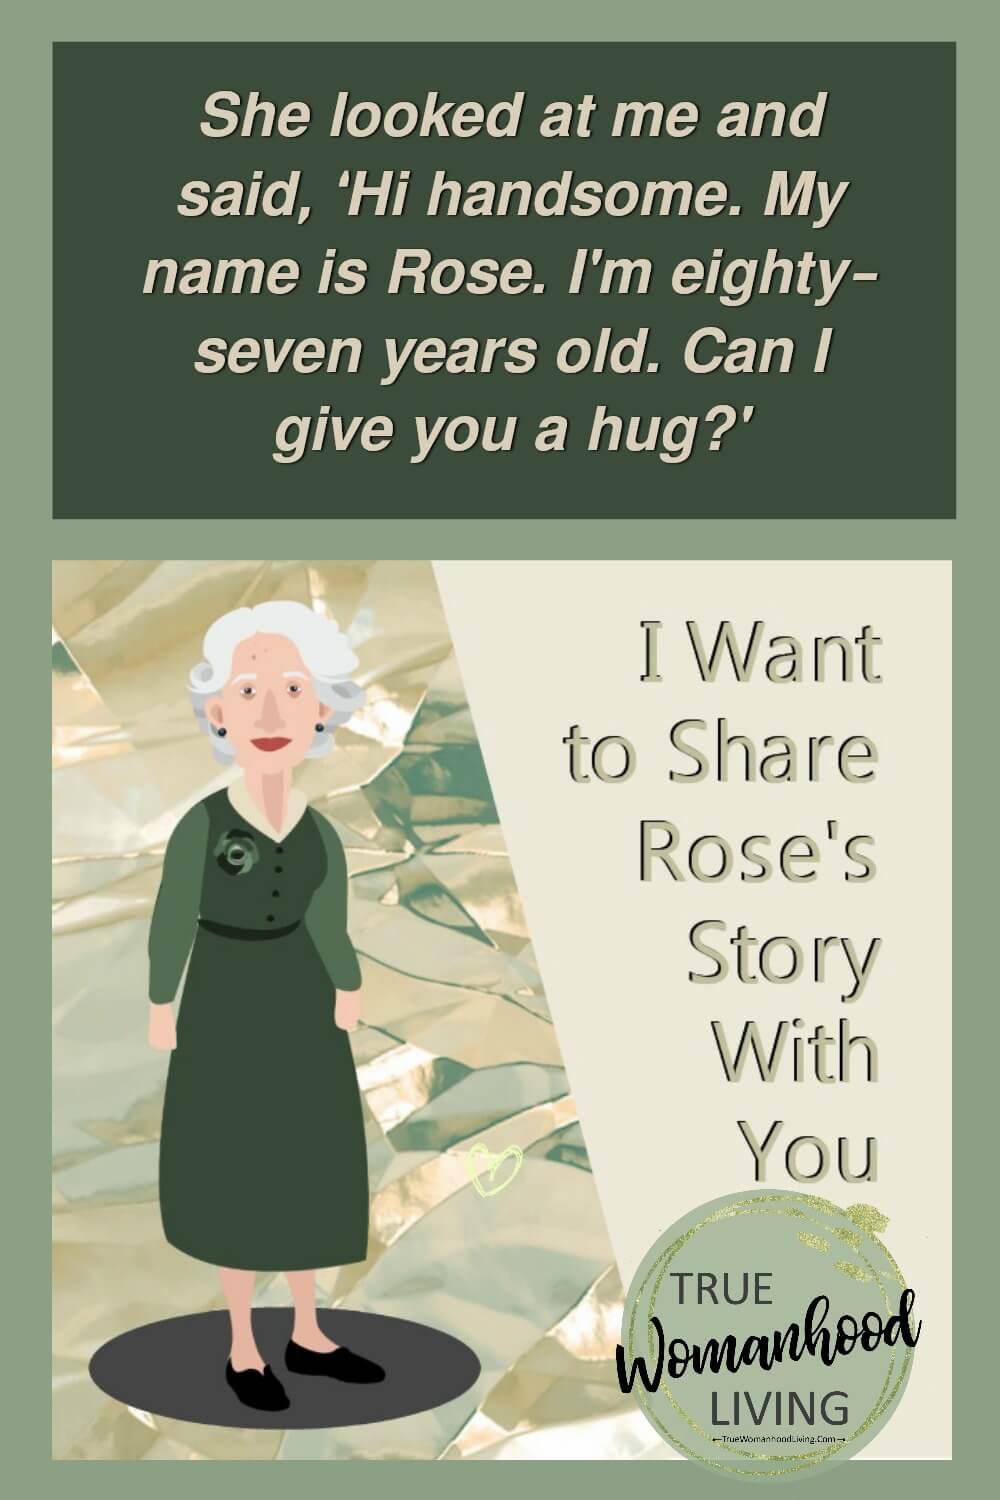 I Want to Share Rose's Story With You